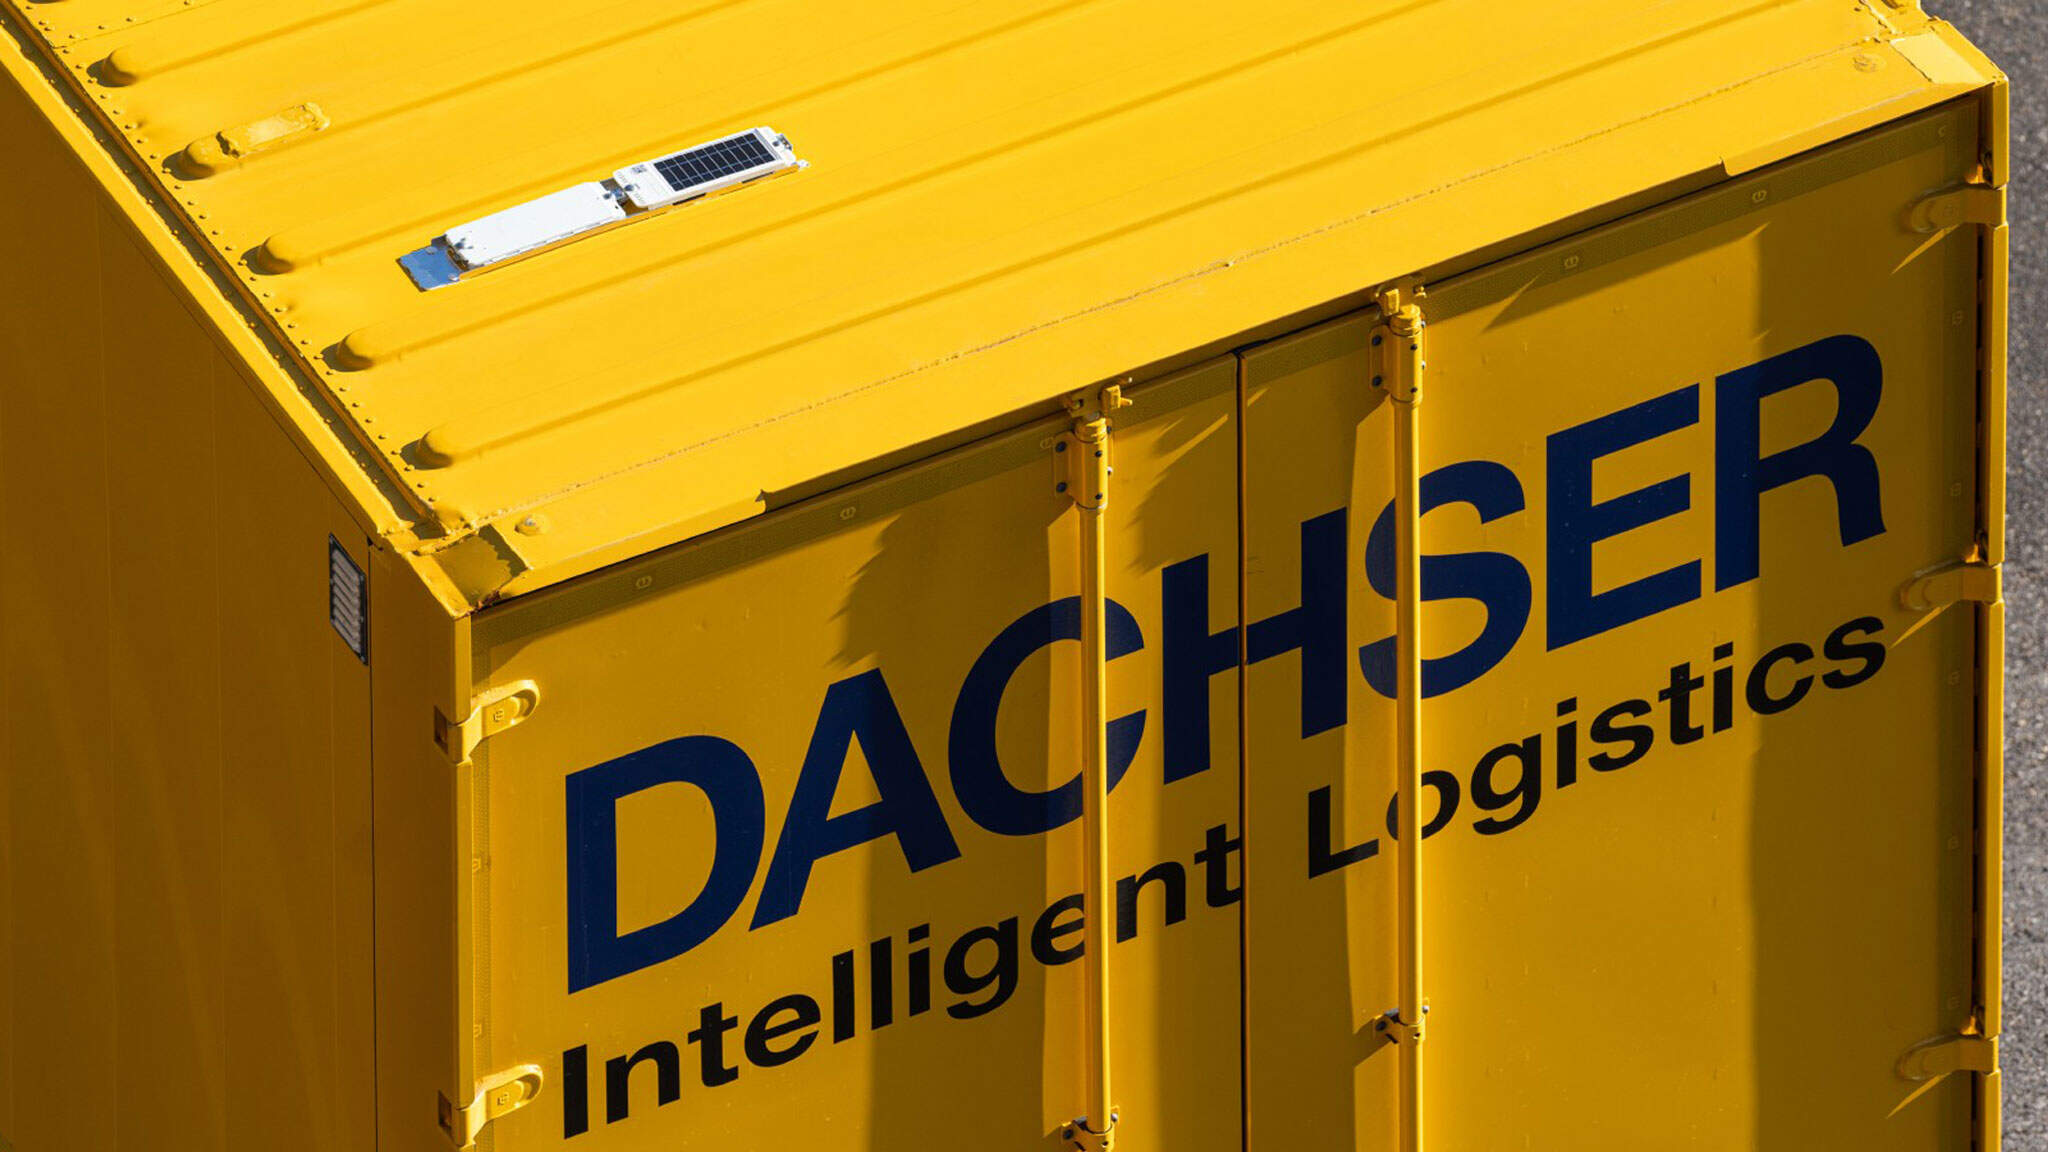 DACHSER uses the internet of things in long-distance groupage transport